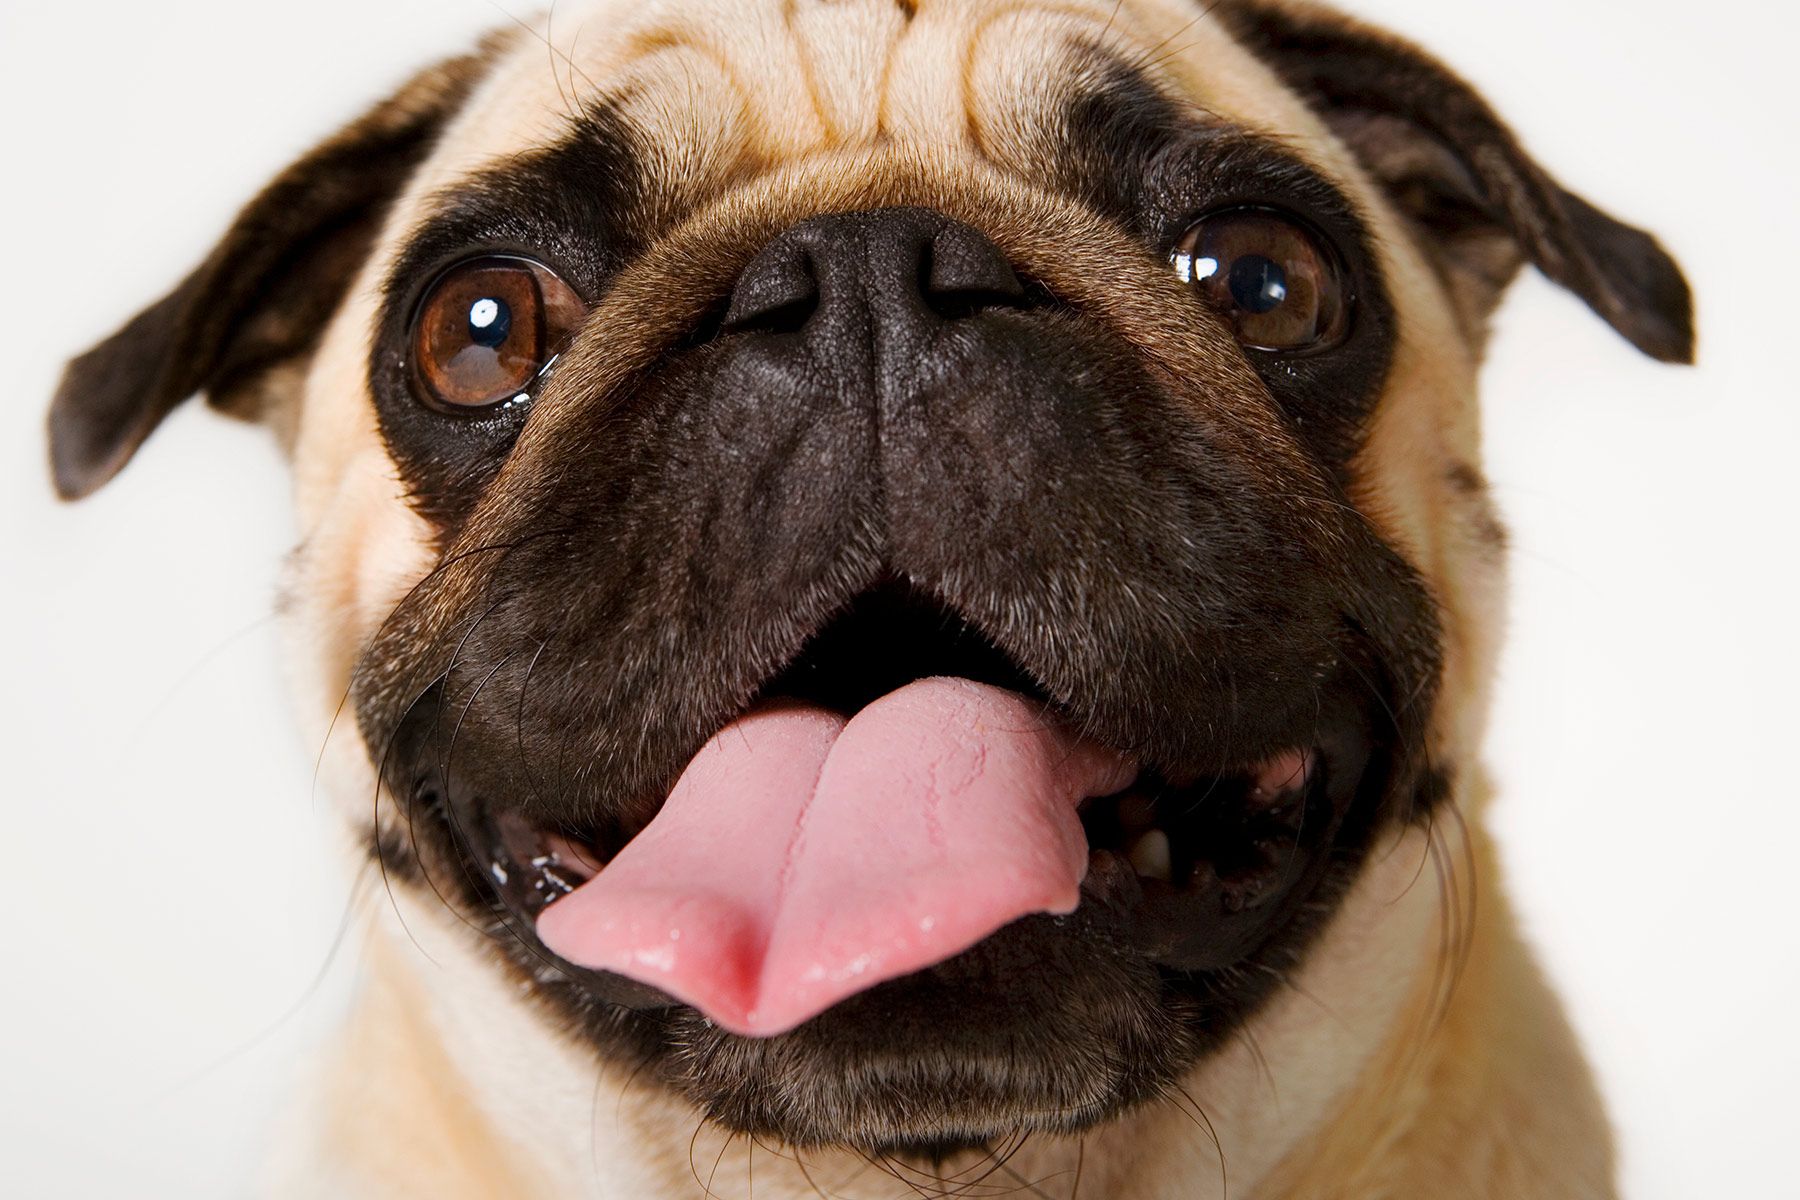 Pugs No Longer Considered ‘Typical Dog’ Due to Health Issues